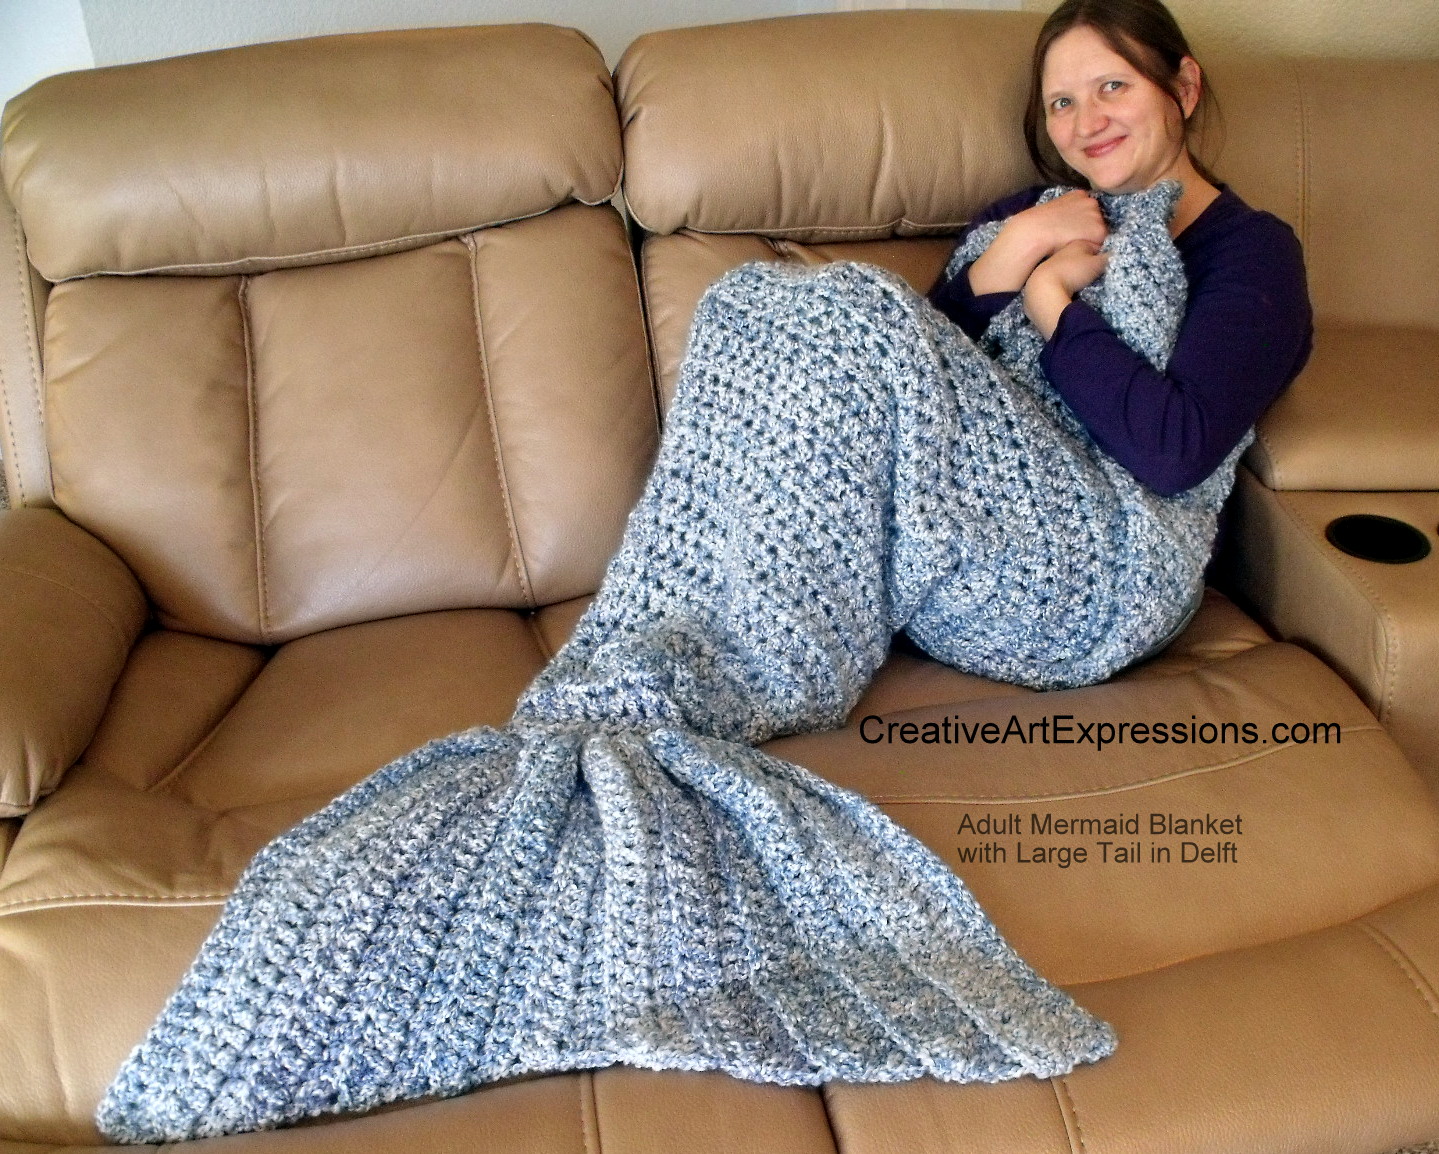 Creative Art Expressions Hand Crocheted Delft Adult Mermaid Blanket